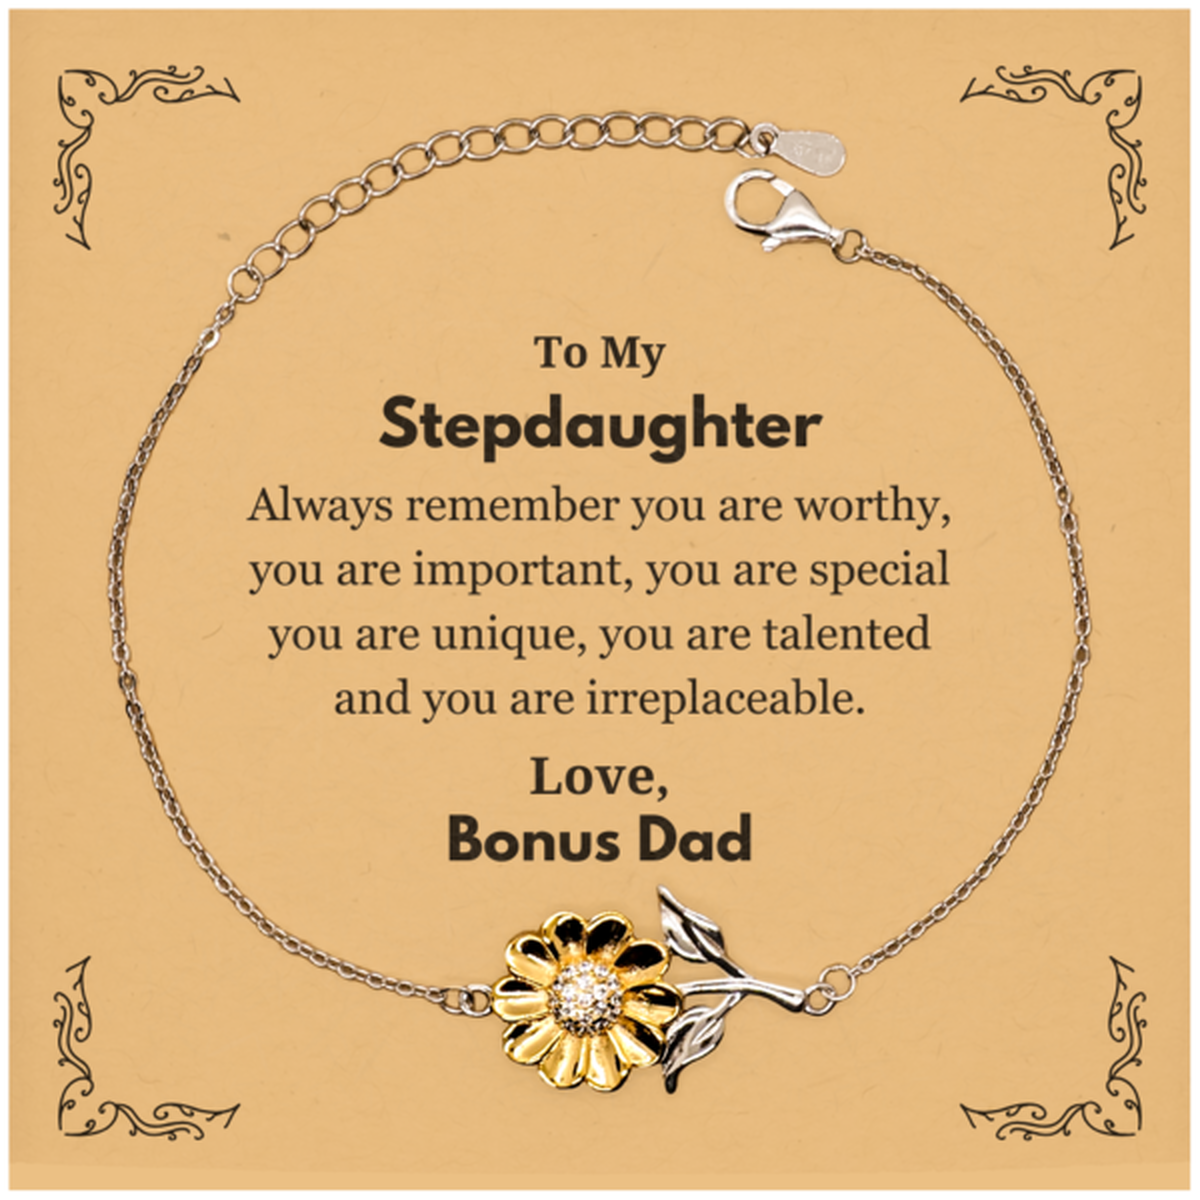 Stepdaughter Birthday Gifts from Bonus Dad, Inspirational Sunflower Bracelet for Stepdaughter Christmas Graduation Gifts for Stepdaughter Always remember you are worthy, you are important. Love, Bonus Dad